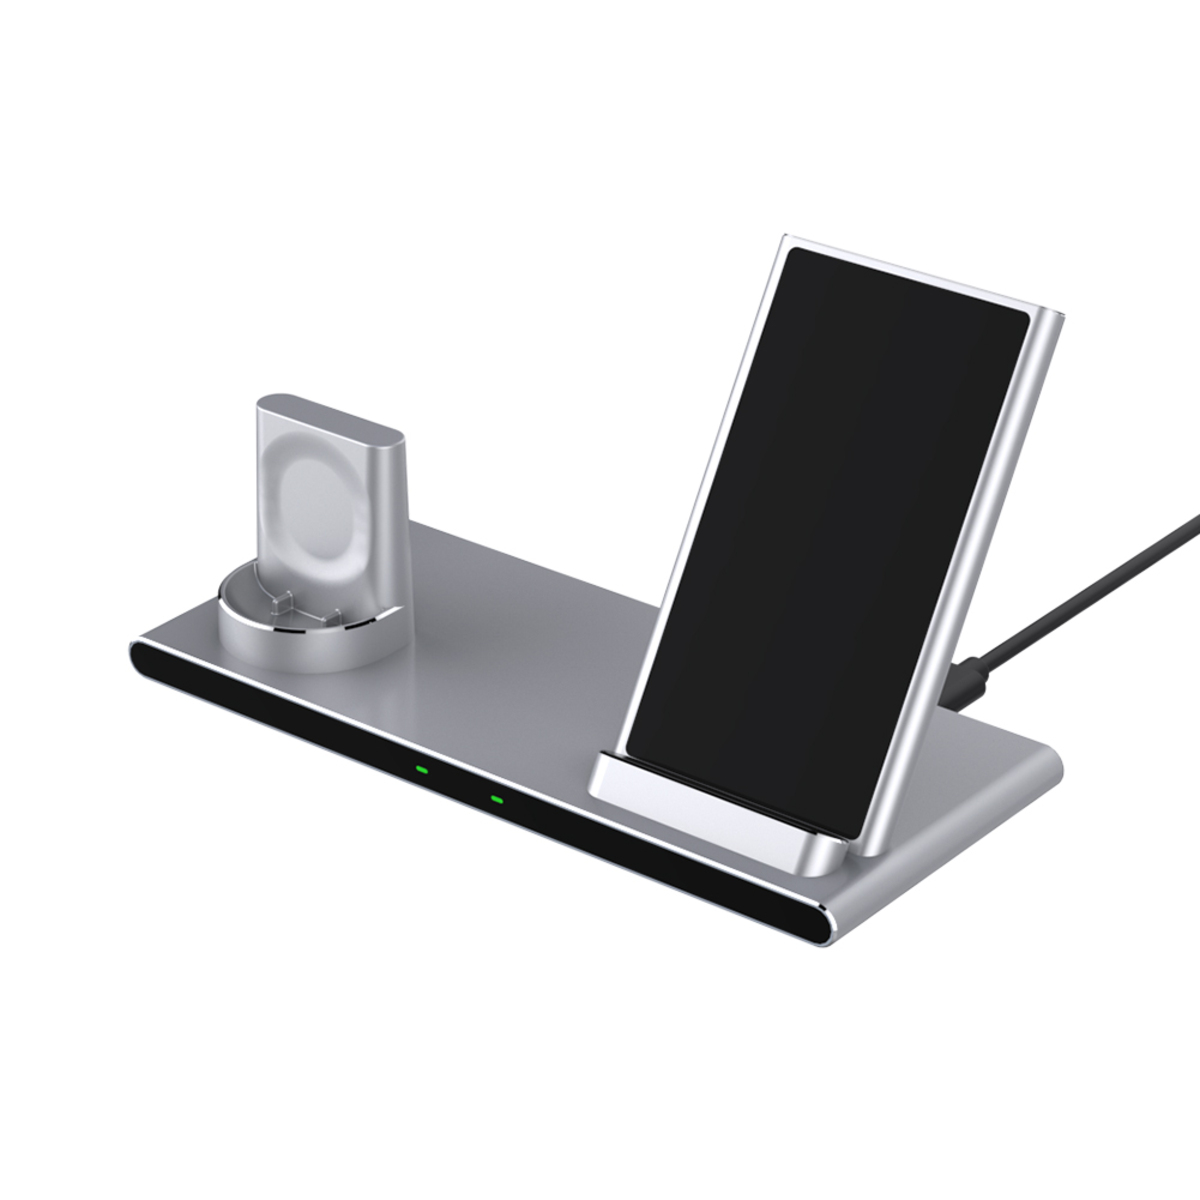 Yootech Wireless Charger Stand Review: Broad Compatibility